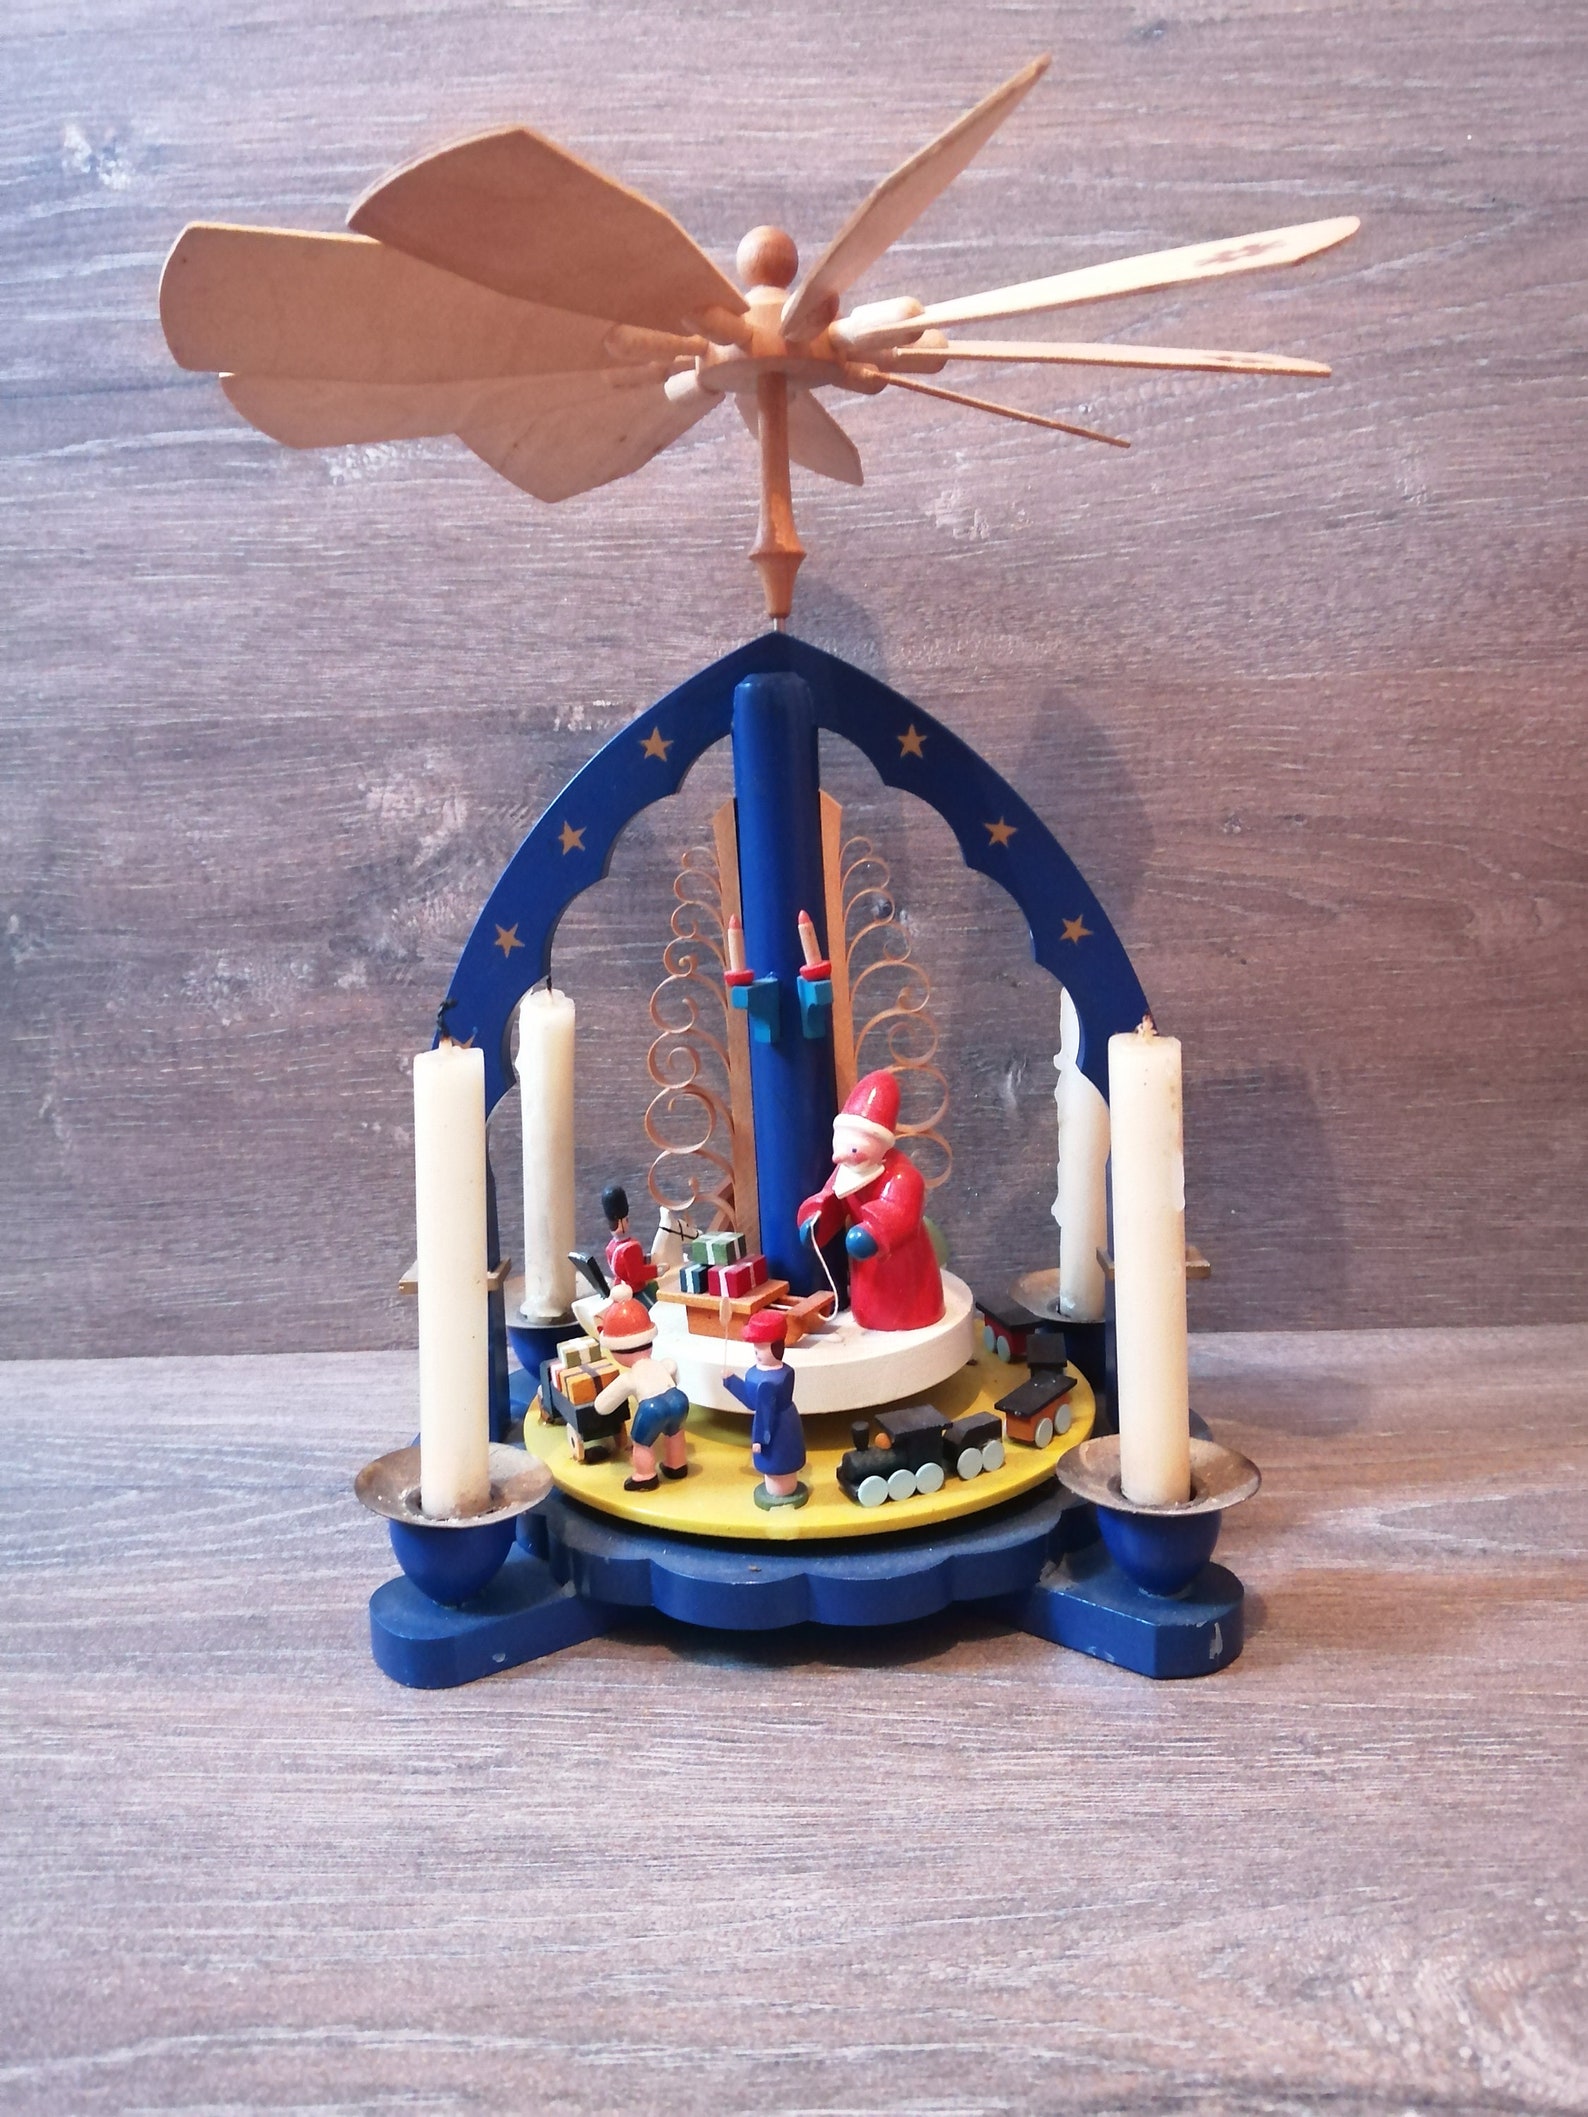 Vintage Christmas Handmade Erzgebirge German pyramid with hand carved wooden figurines and 4 candles 80s